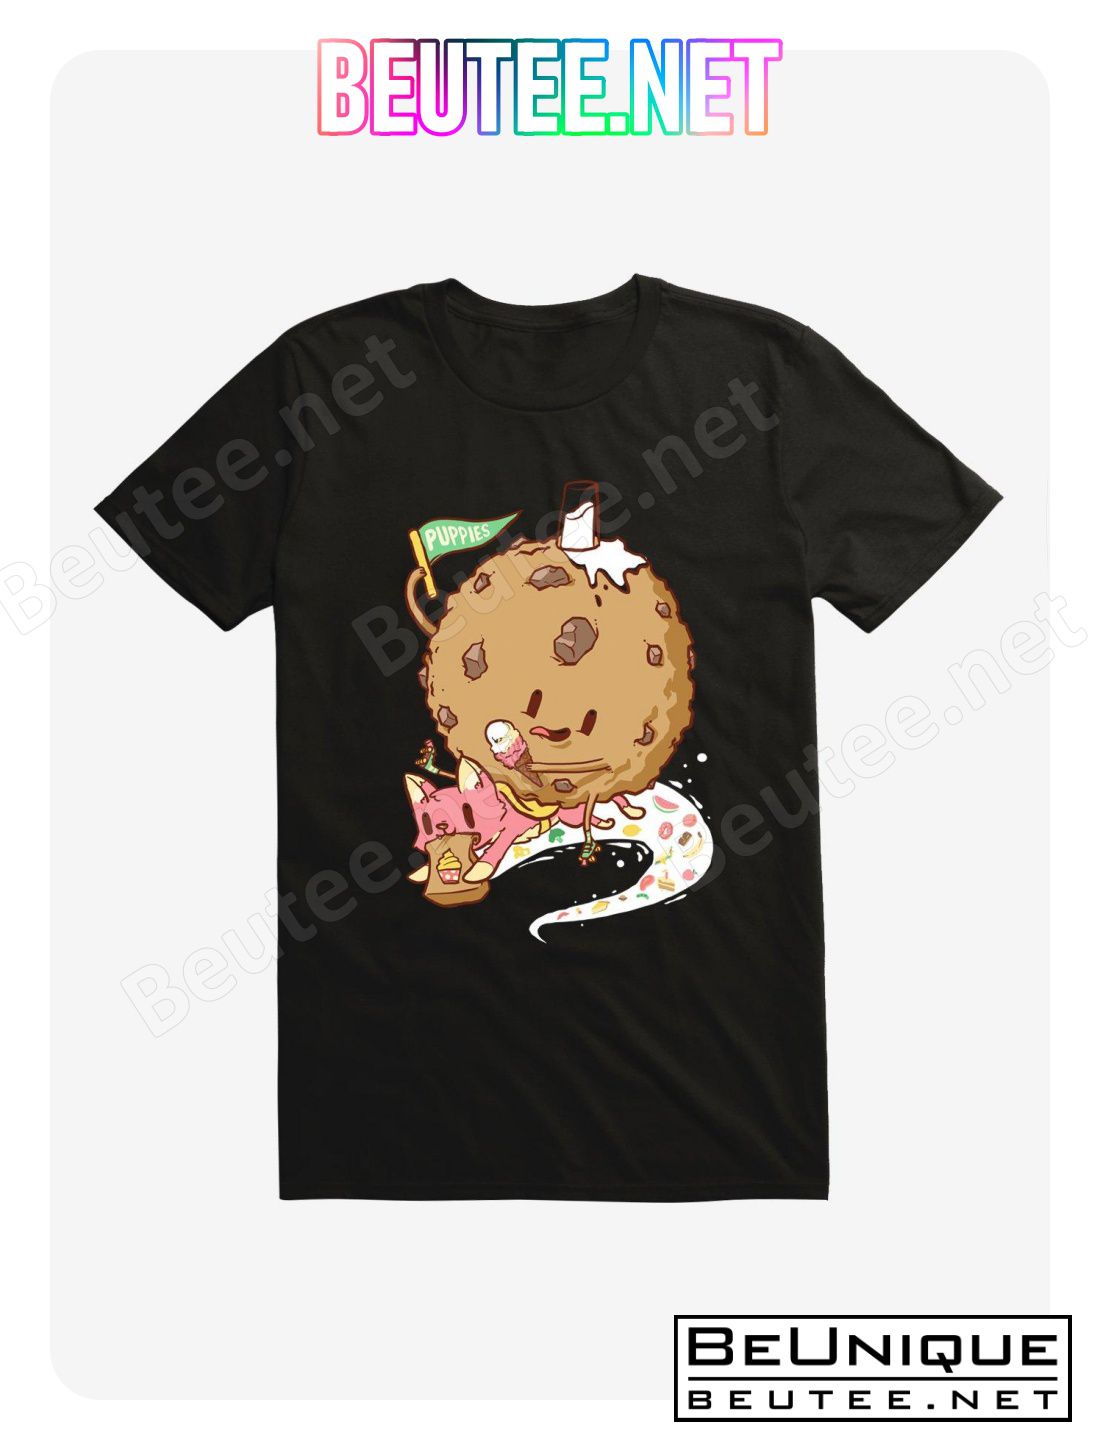 Cake Delivery Cat Black T-Shirt